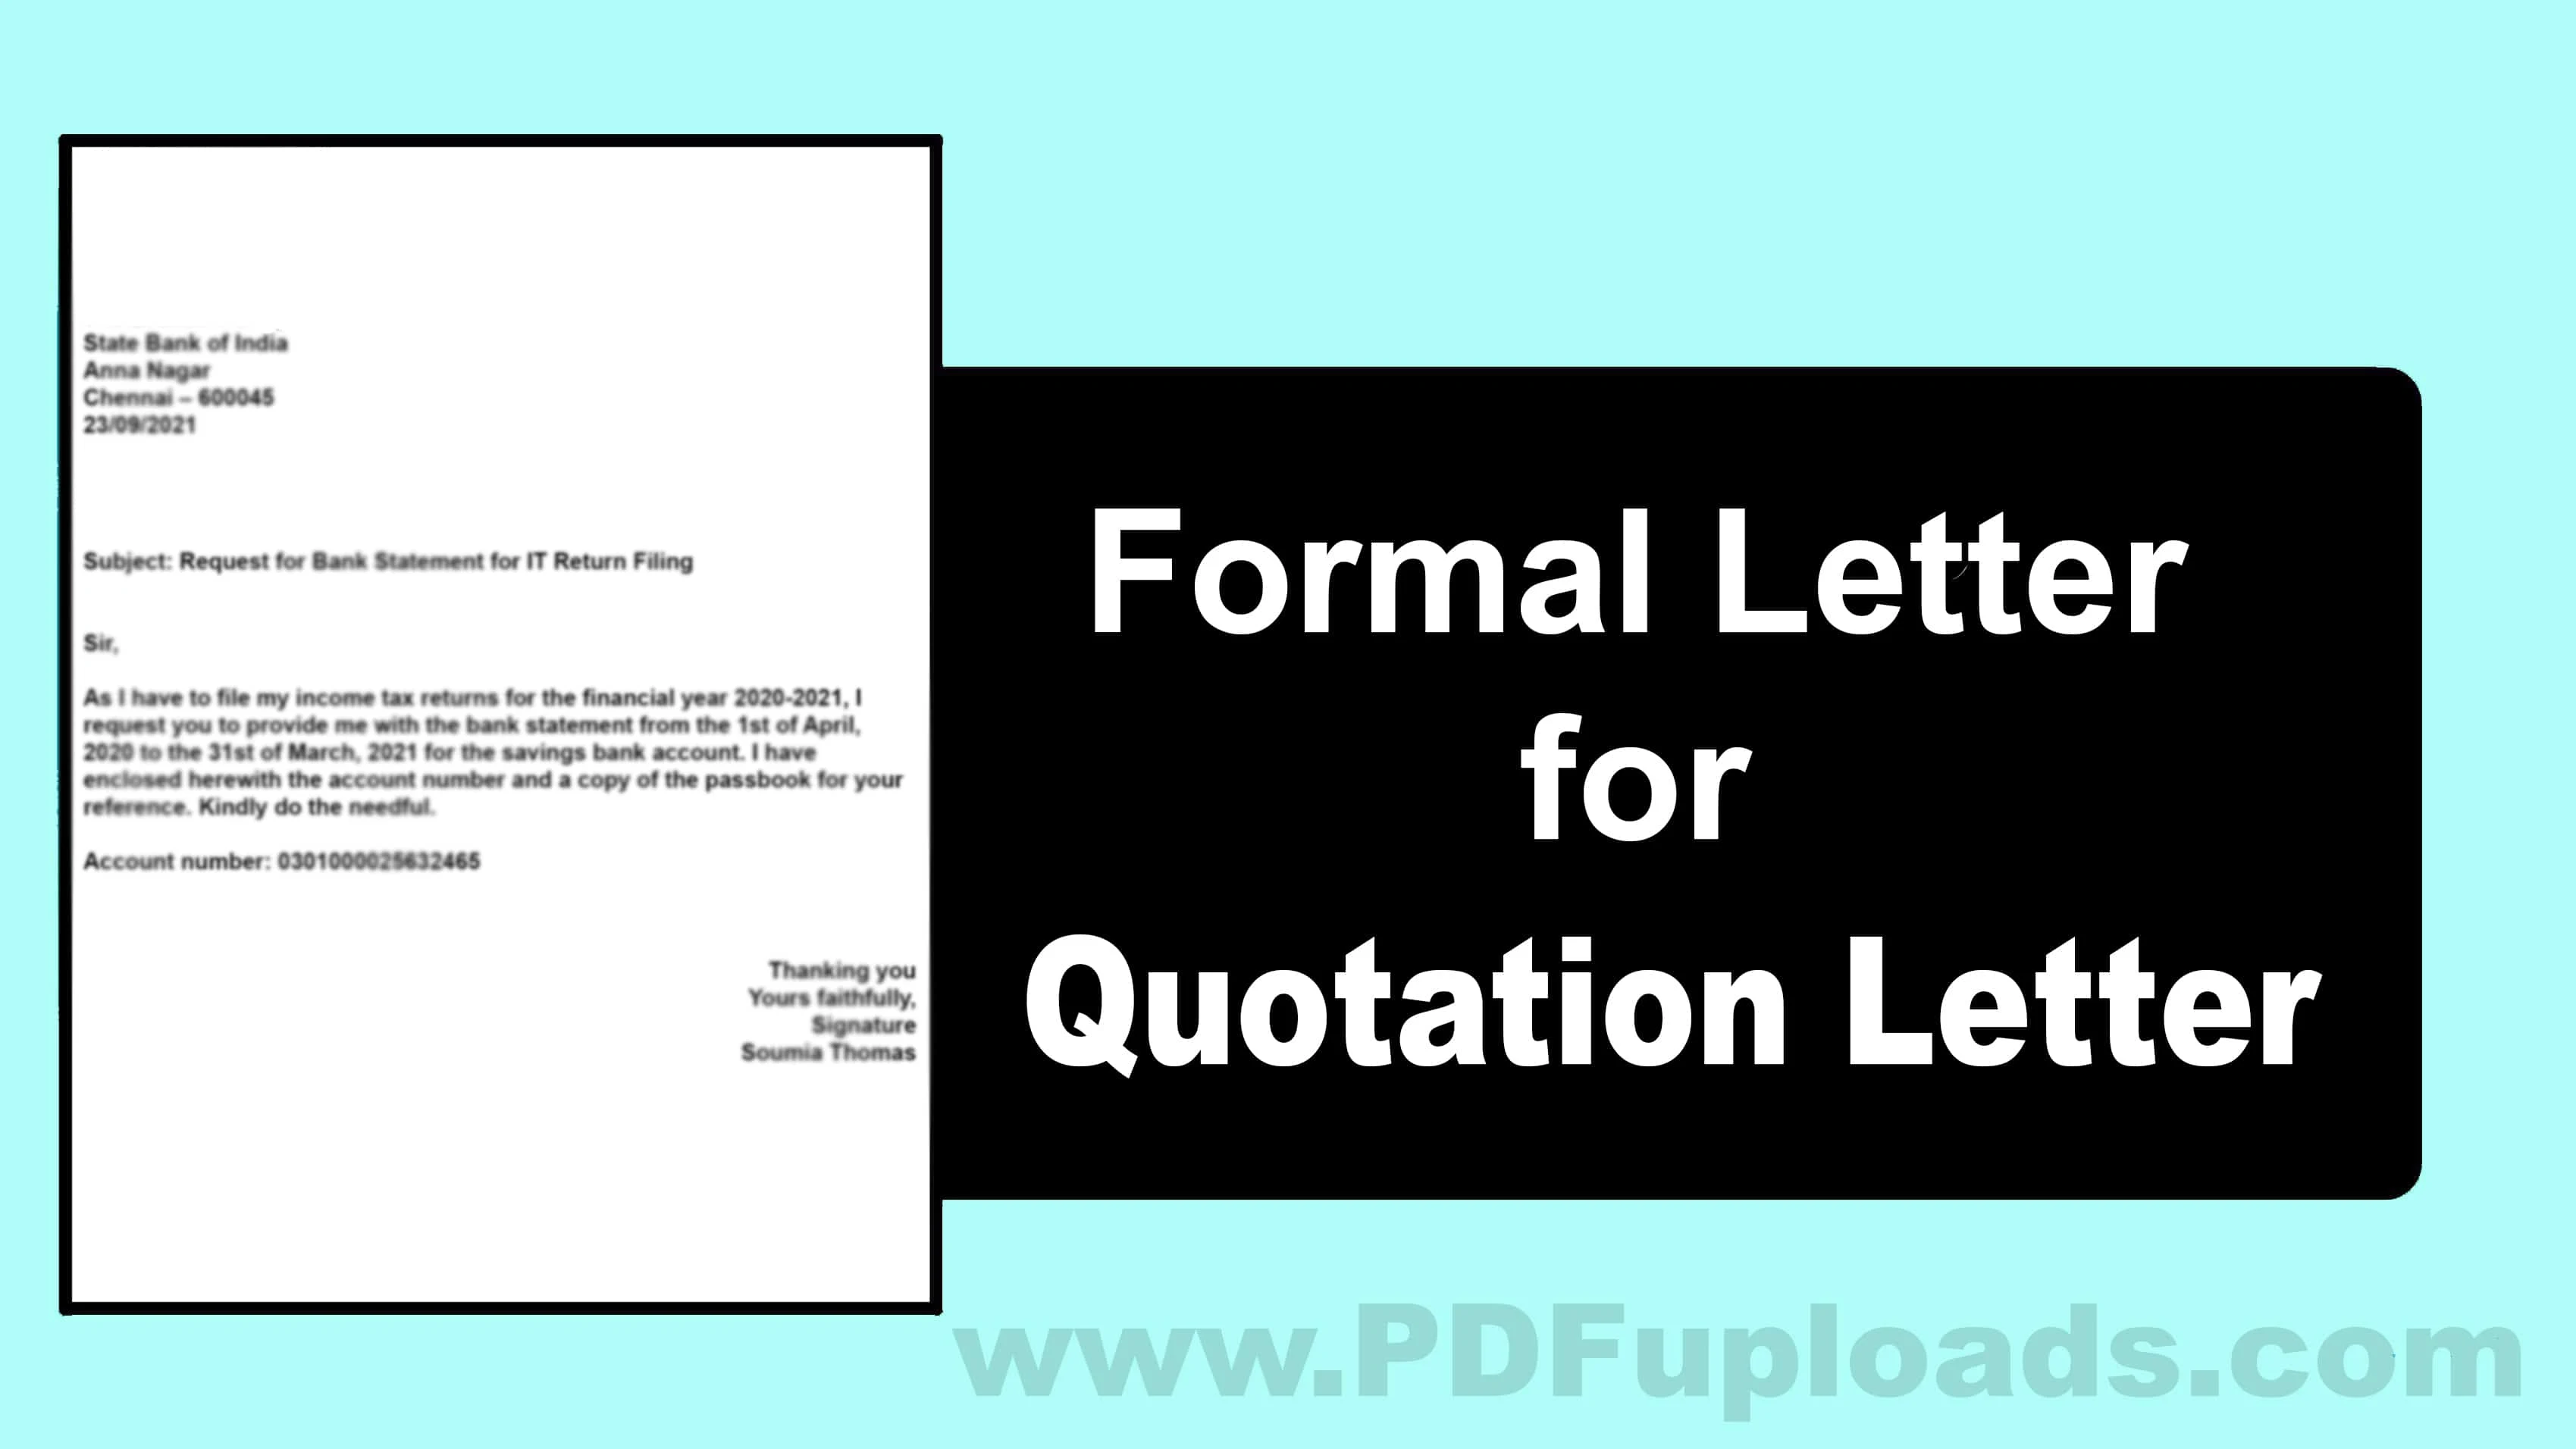 Quotation Letter Format and Sample Quotation Letters